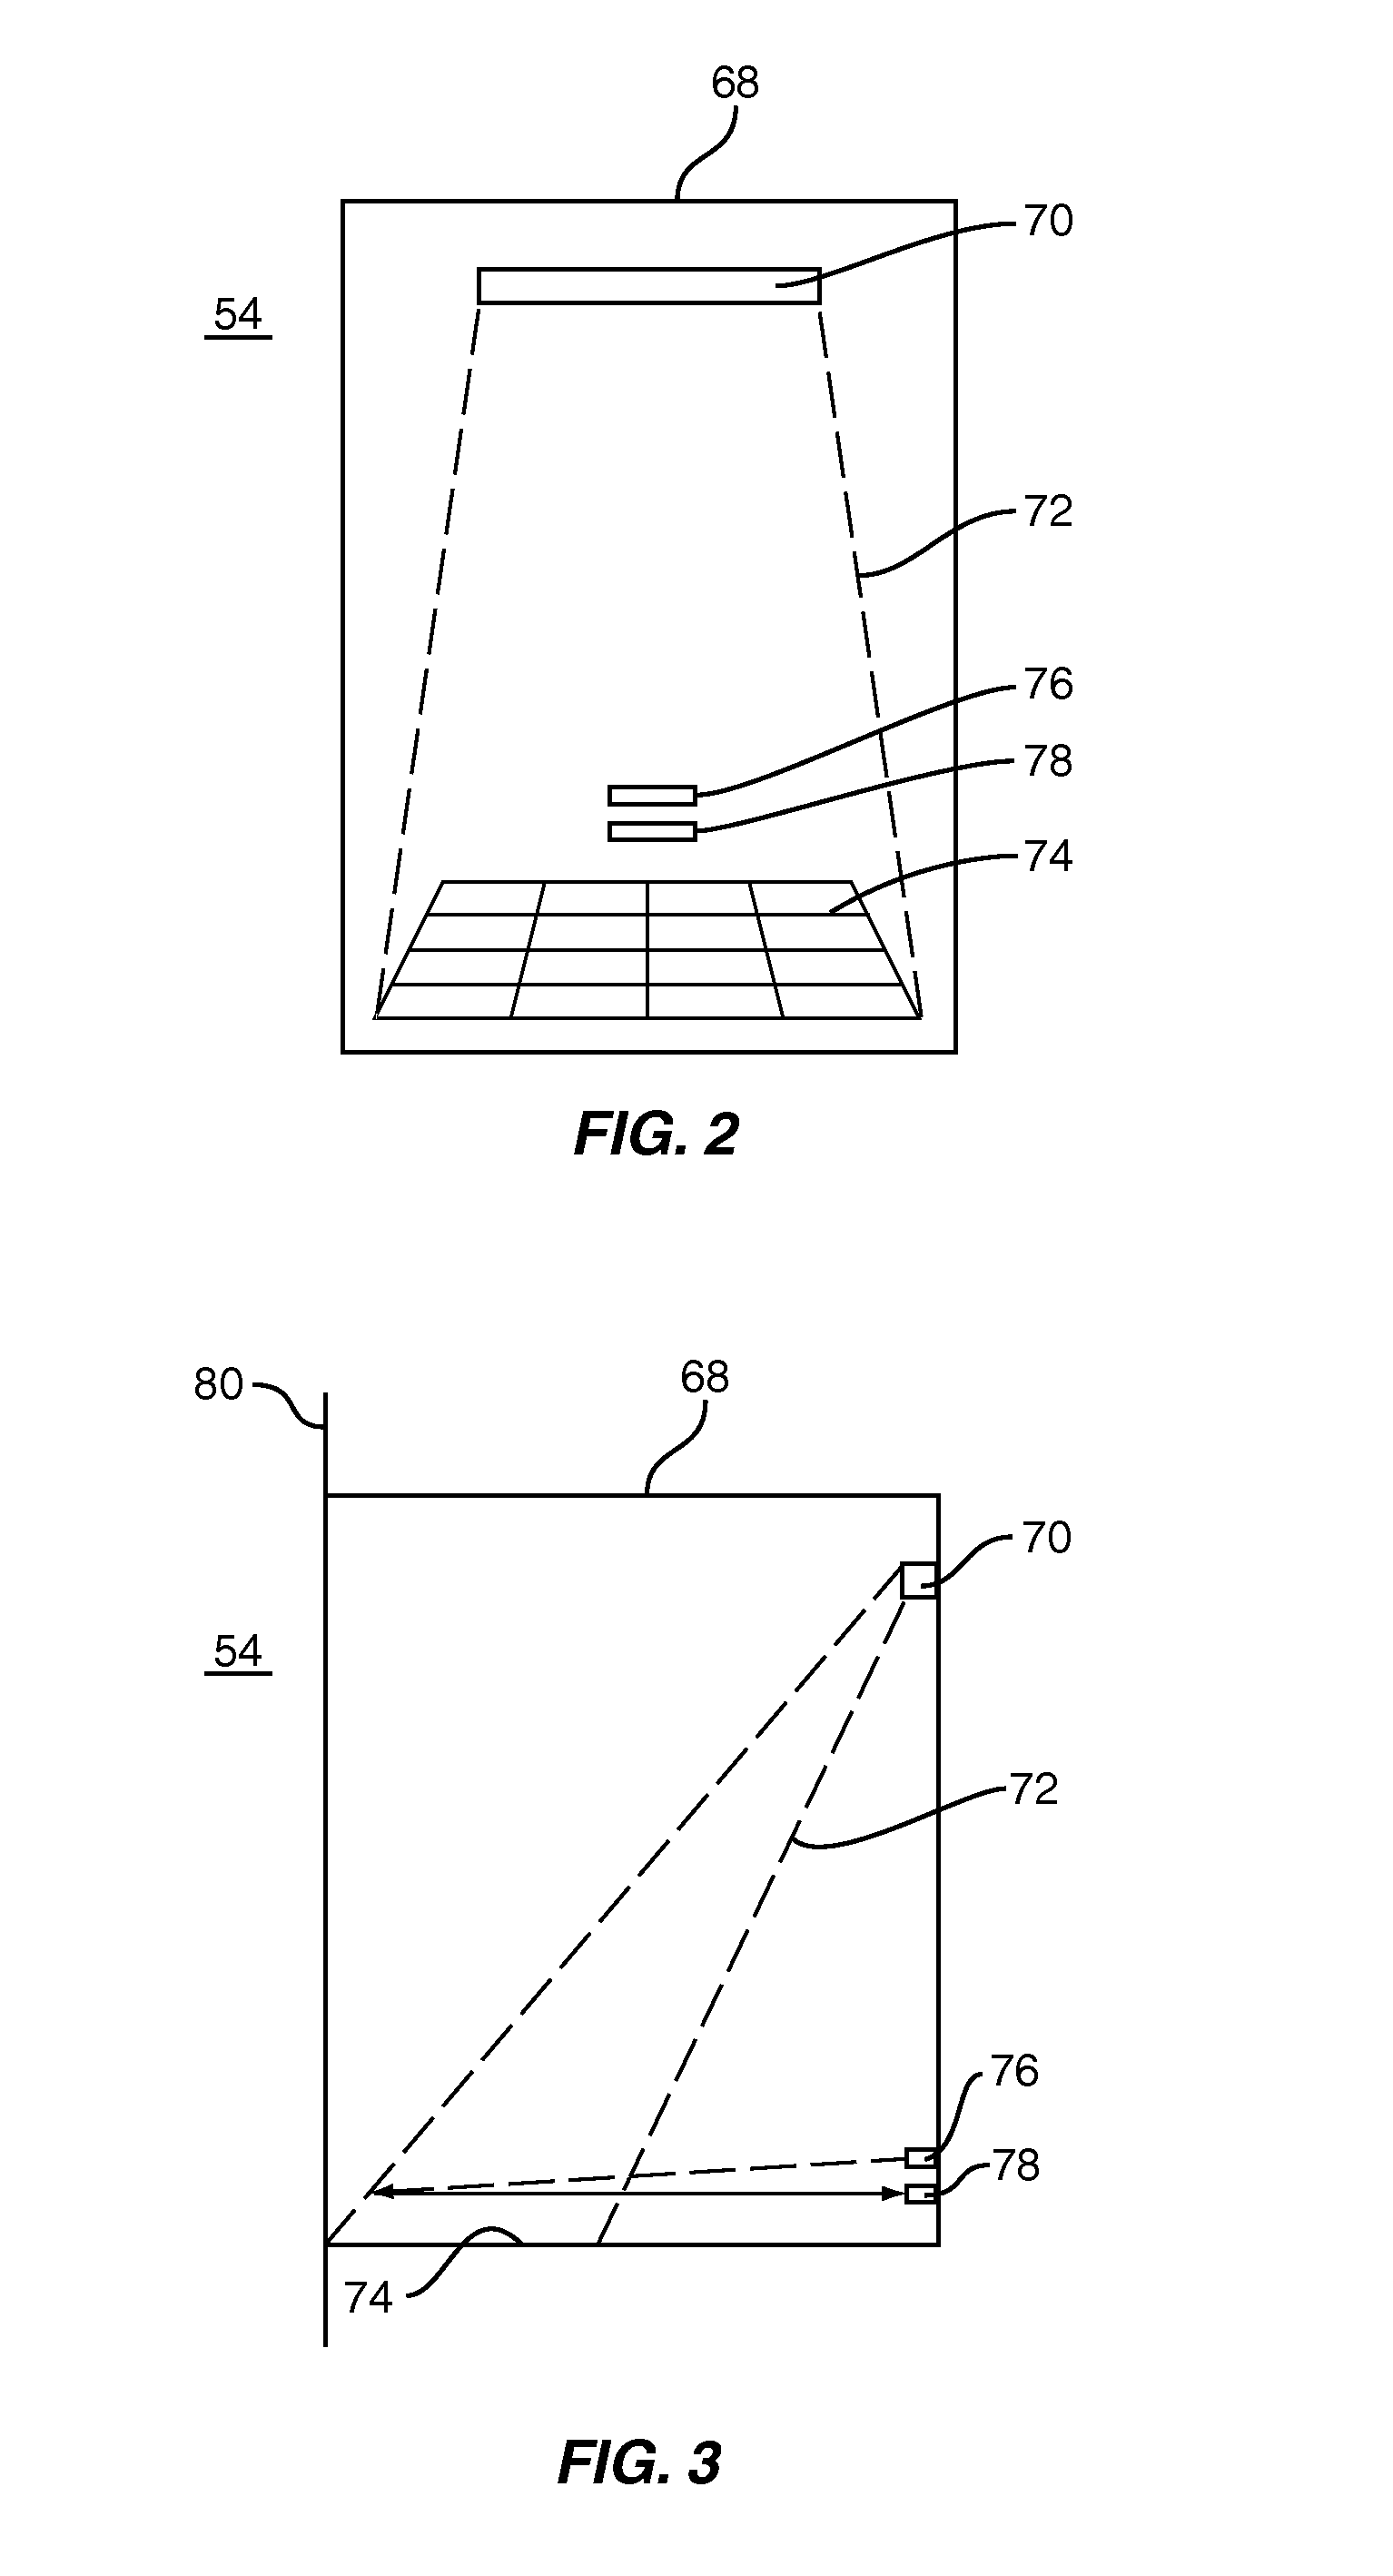 Projected user input device for a fuel dispenser and related applications